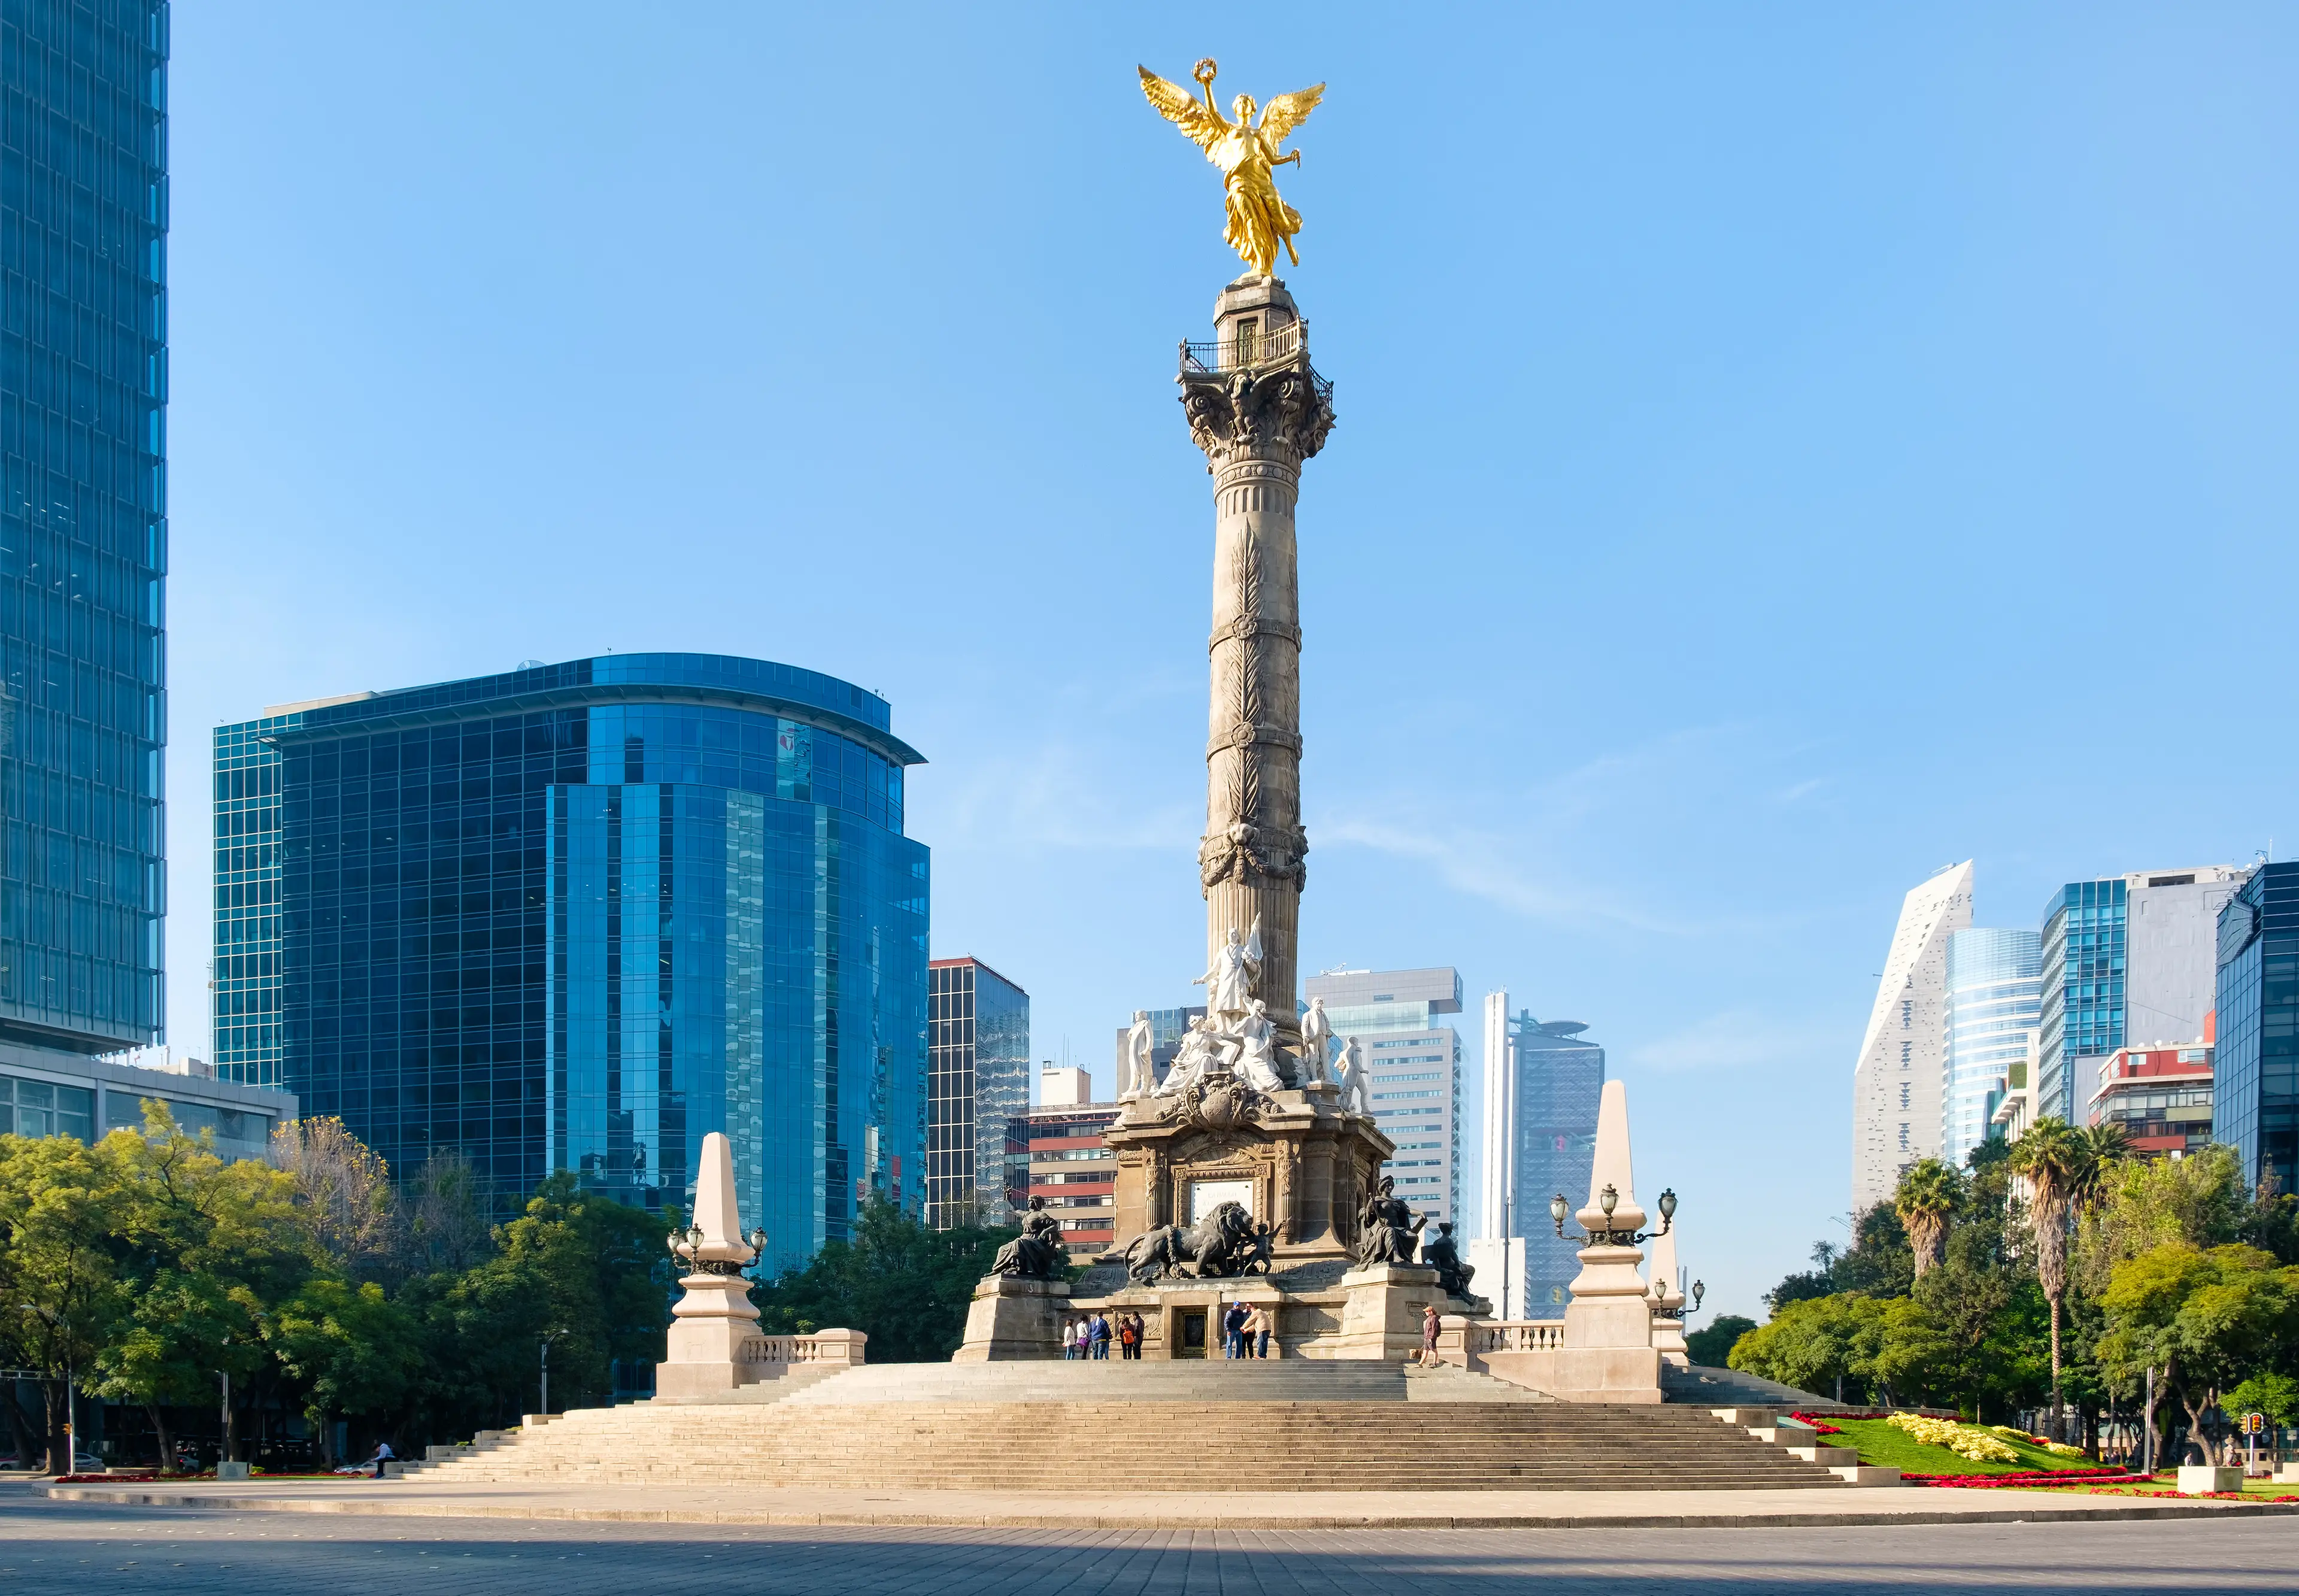 1-Day Solo Local Experience: Sightseeing & Food Tour in Mexico City